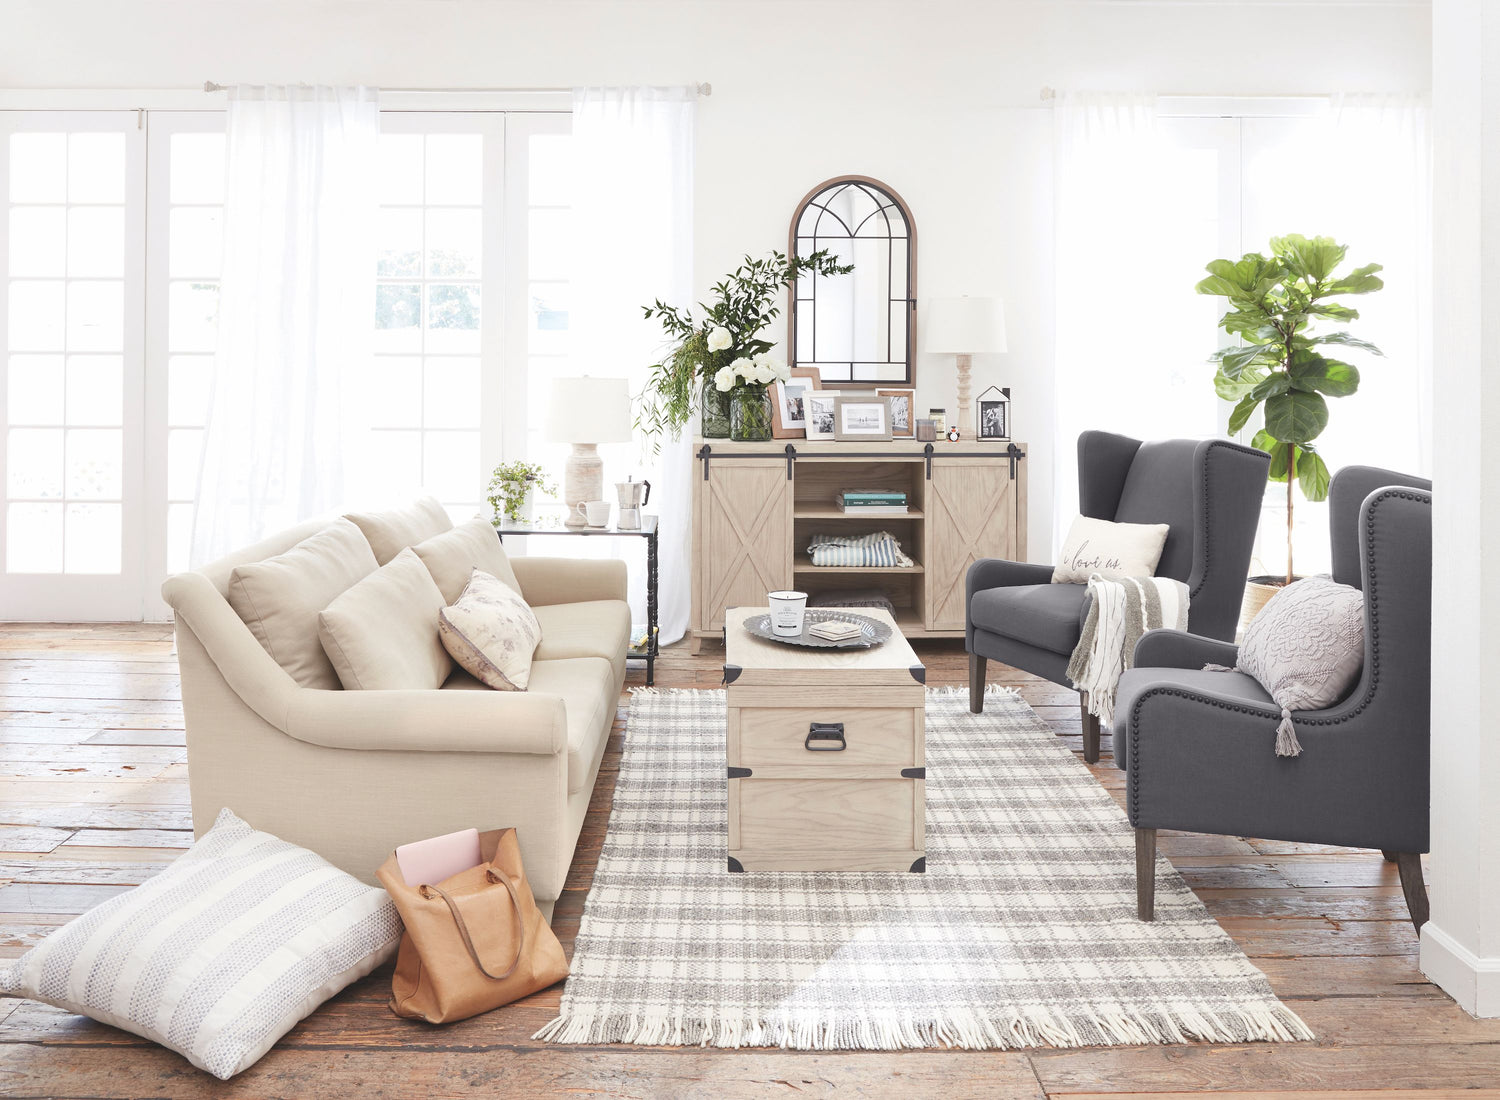 A well-lit, modern living room with a beige sofa, two gray armchairs, a wooden coffee table, and a patterned rug. Decor includes potted plants, a wall mirror, and various cushions. A leather bag and striped pillow are on the floor, and the room features large windows with white curtains.